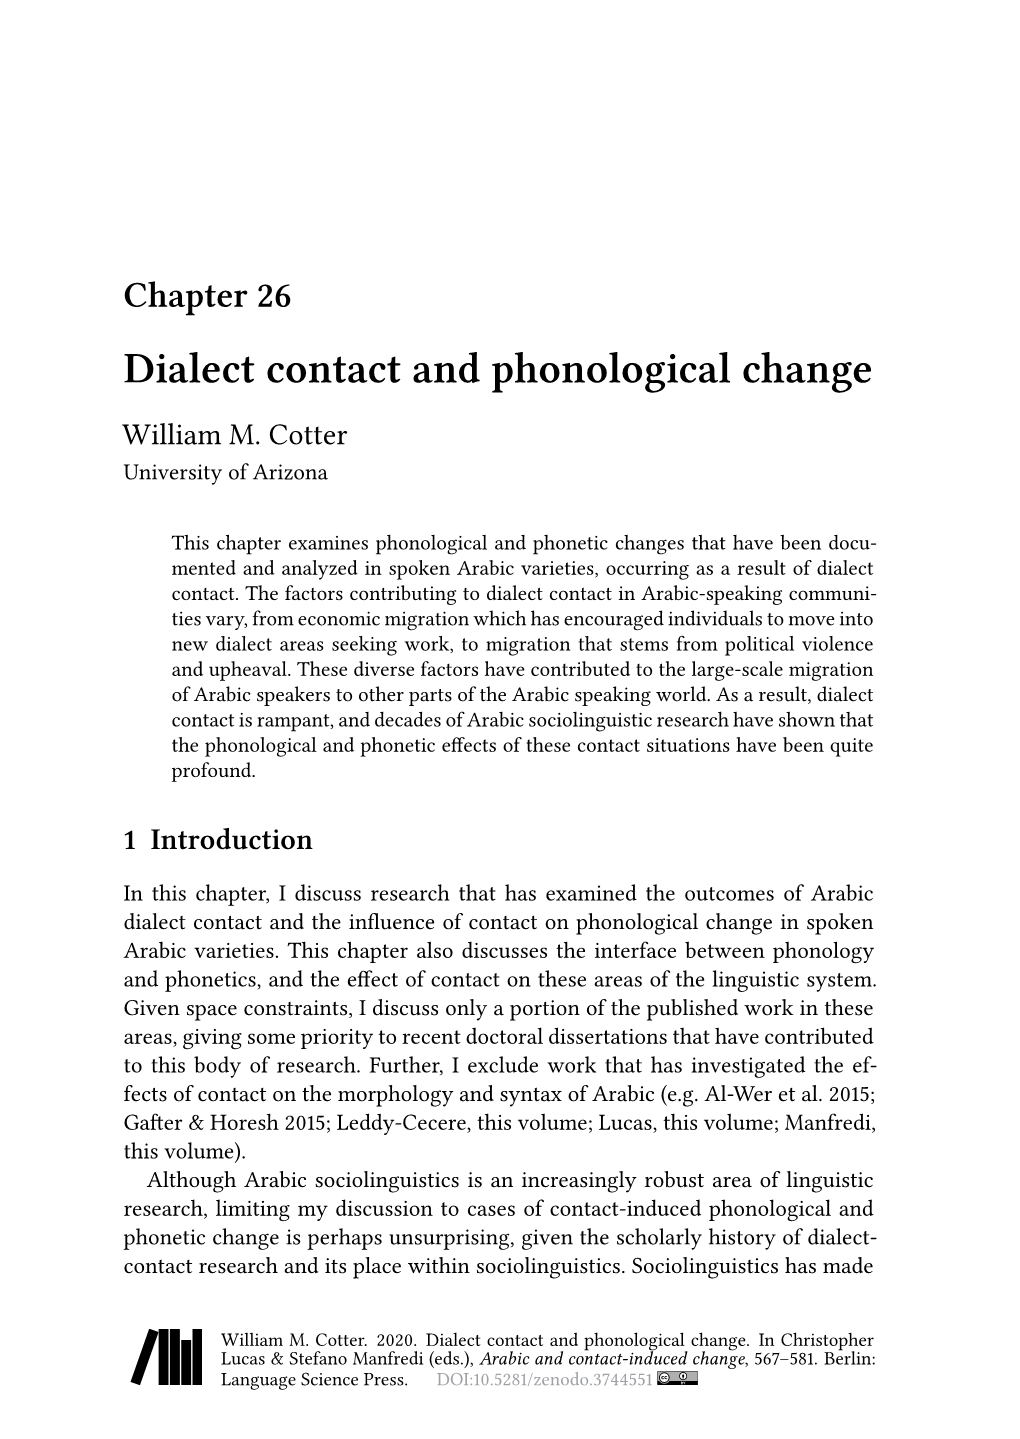 Dialect Contact and Phonological Change William M